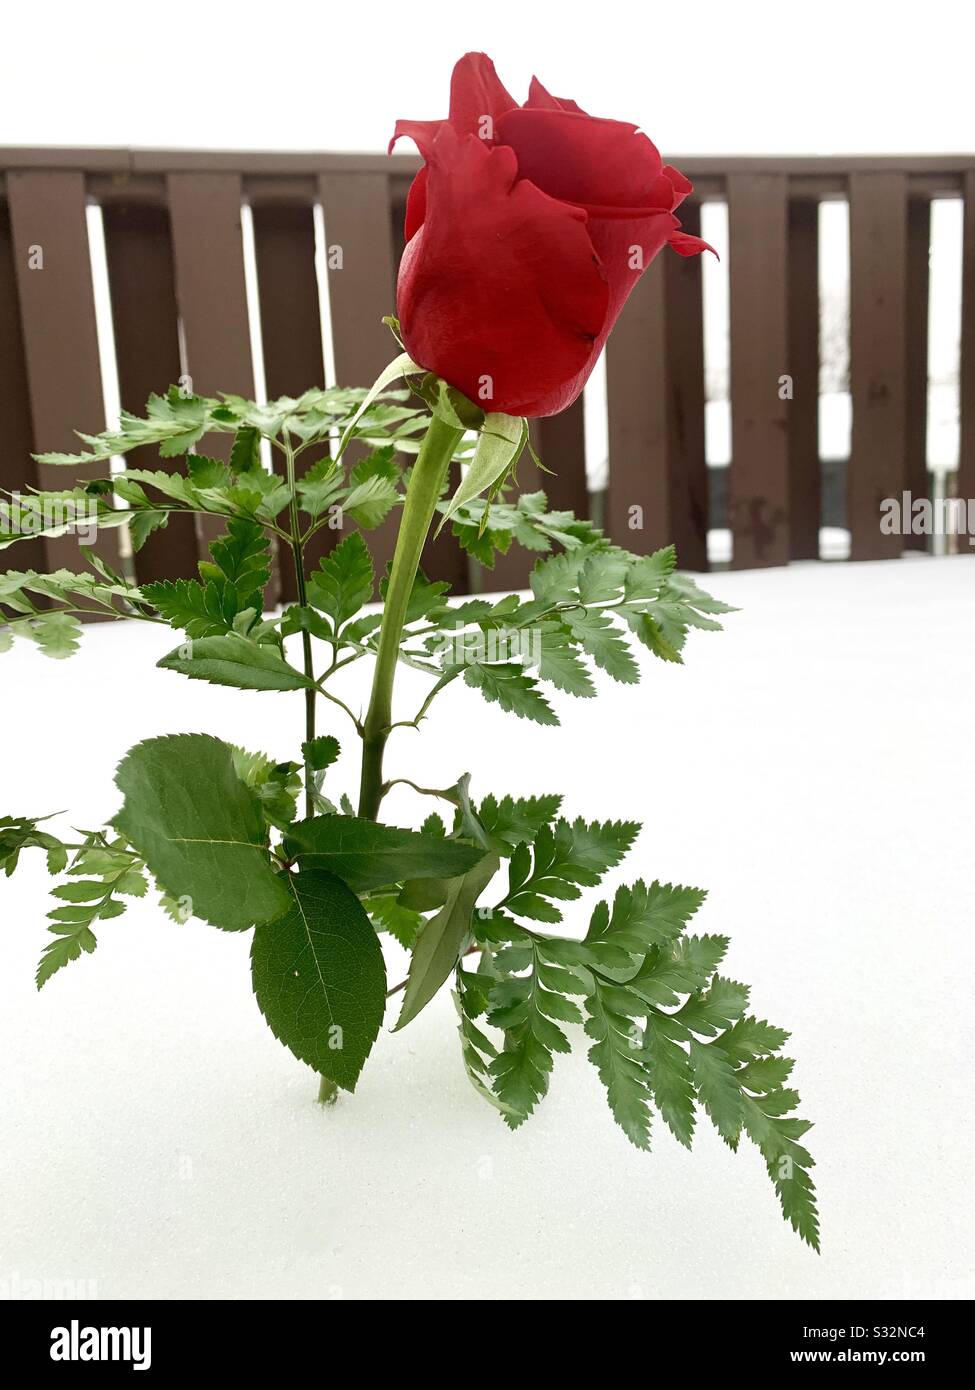 DUBUQUE, IOWA, 01/29/20–Closeup photo of beautiful valentines day single red rose with green fern standing in bed of white snow in front of deck railing on cold winter day. Stock Photo